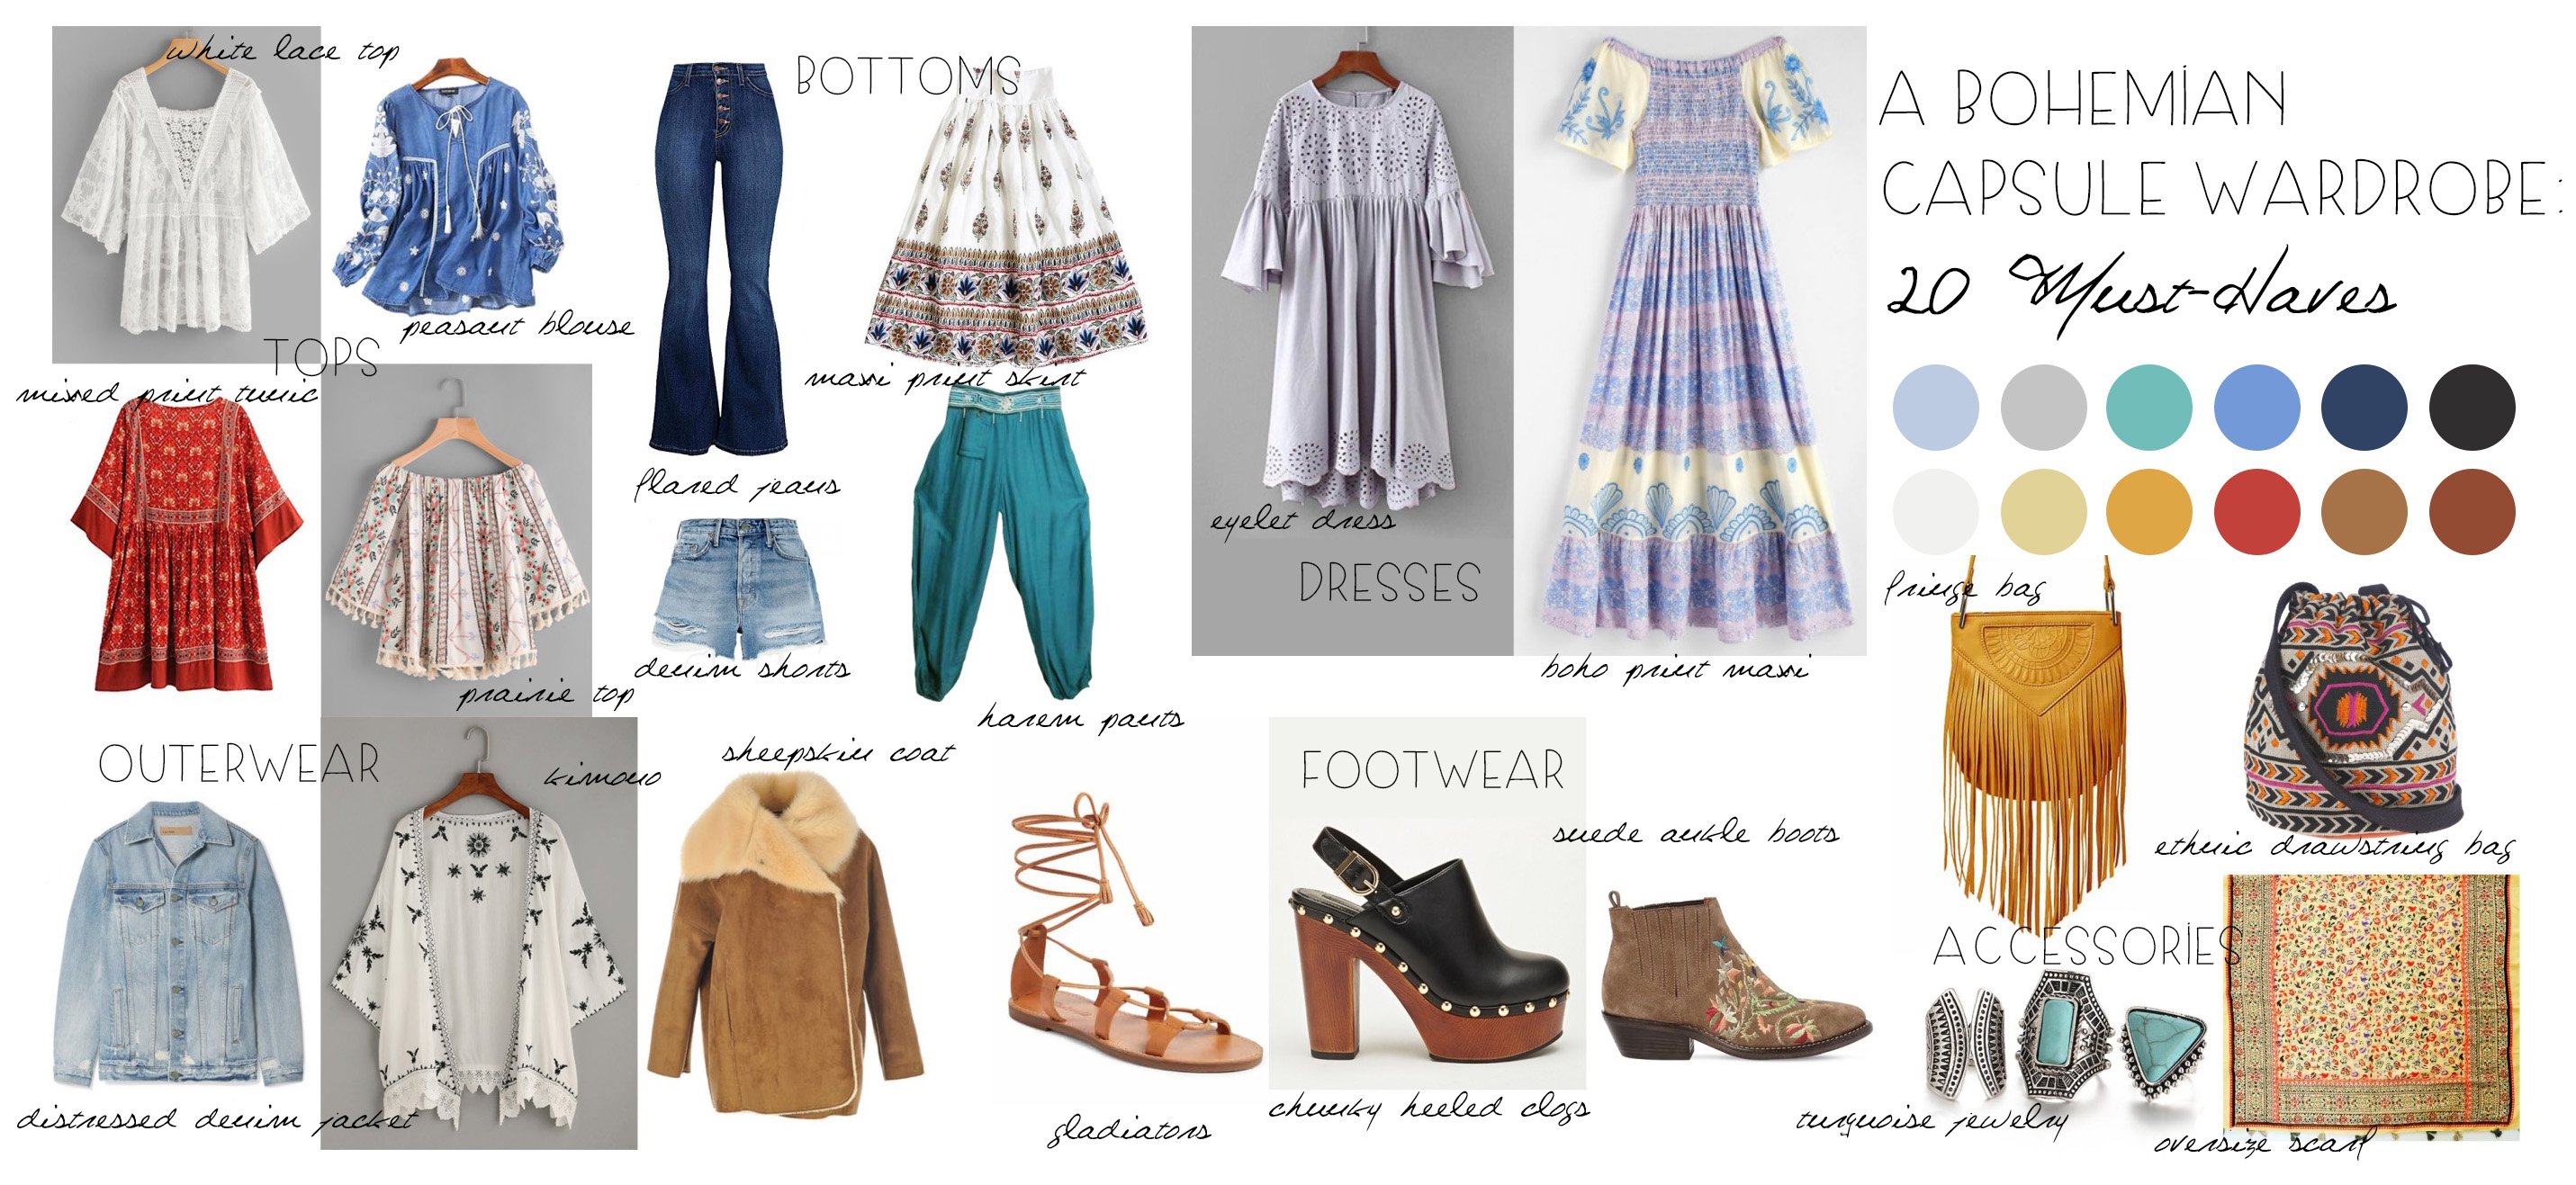 Boho Hippie Clothing: The ultimate 2022 guide to your boho hippie outfit